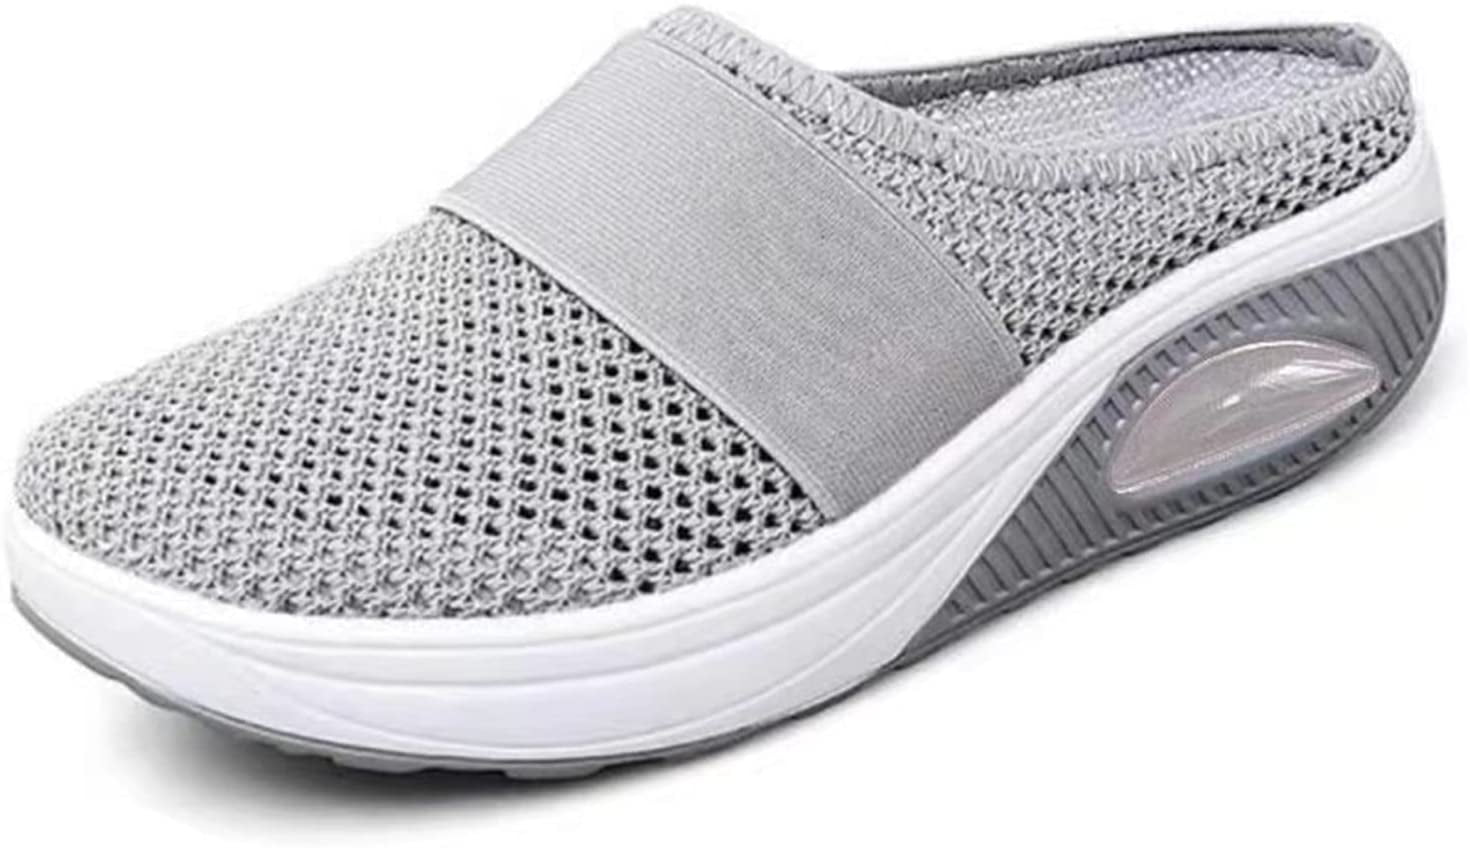 US-4,Black Orthopedic Diabetic Walking Shoes,Womens Mule Sneakers,Breathable with Arch Support Knit Casual Shoes Women's Air Cushion Slip-On Walking Shoes 